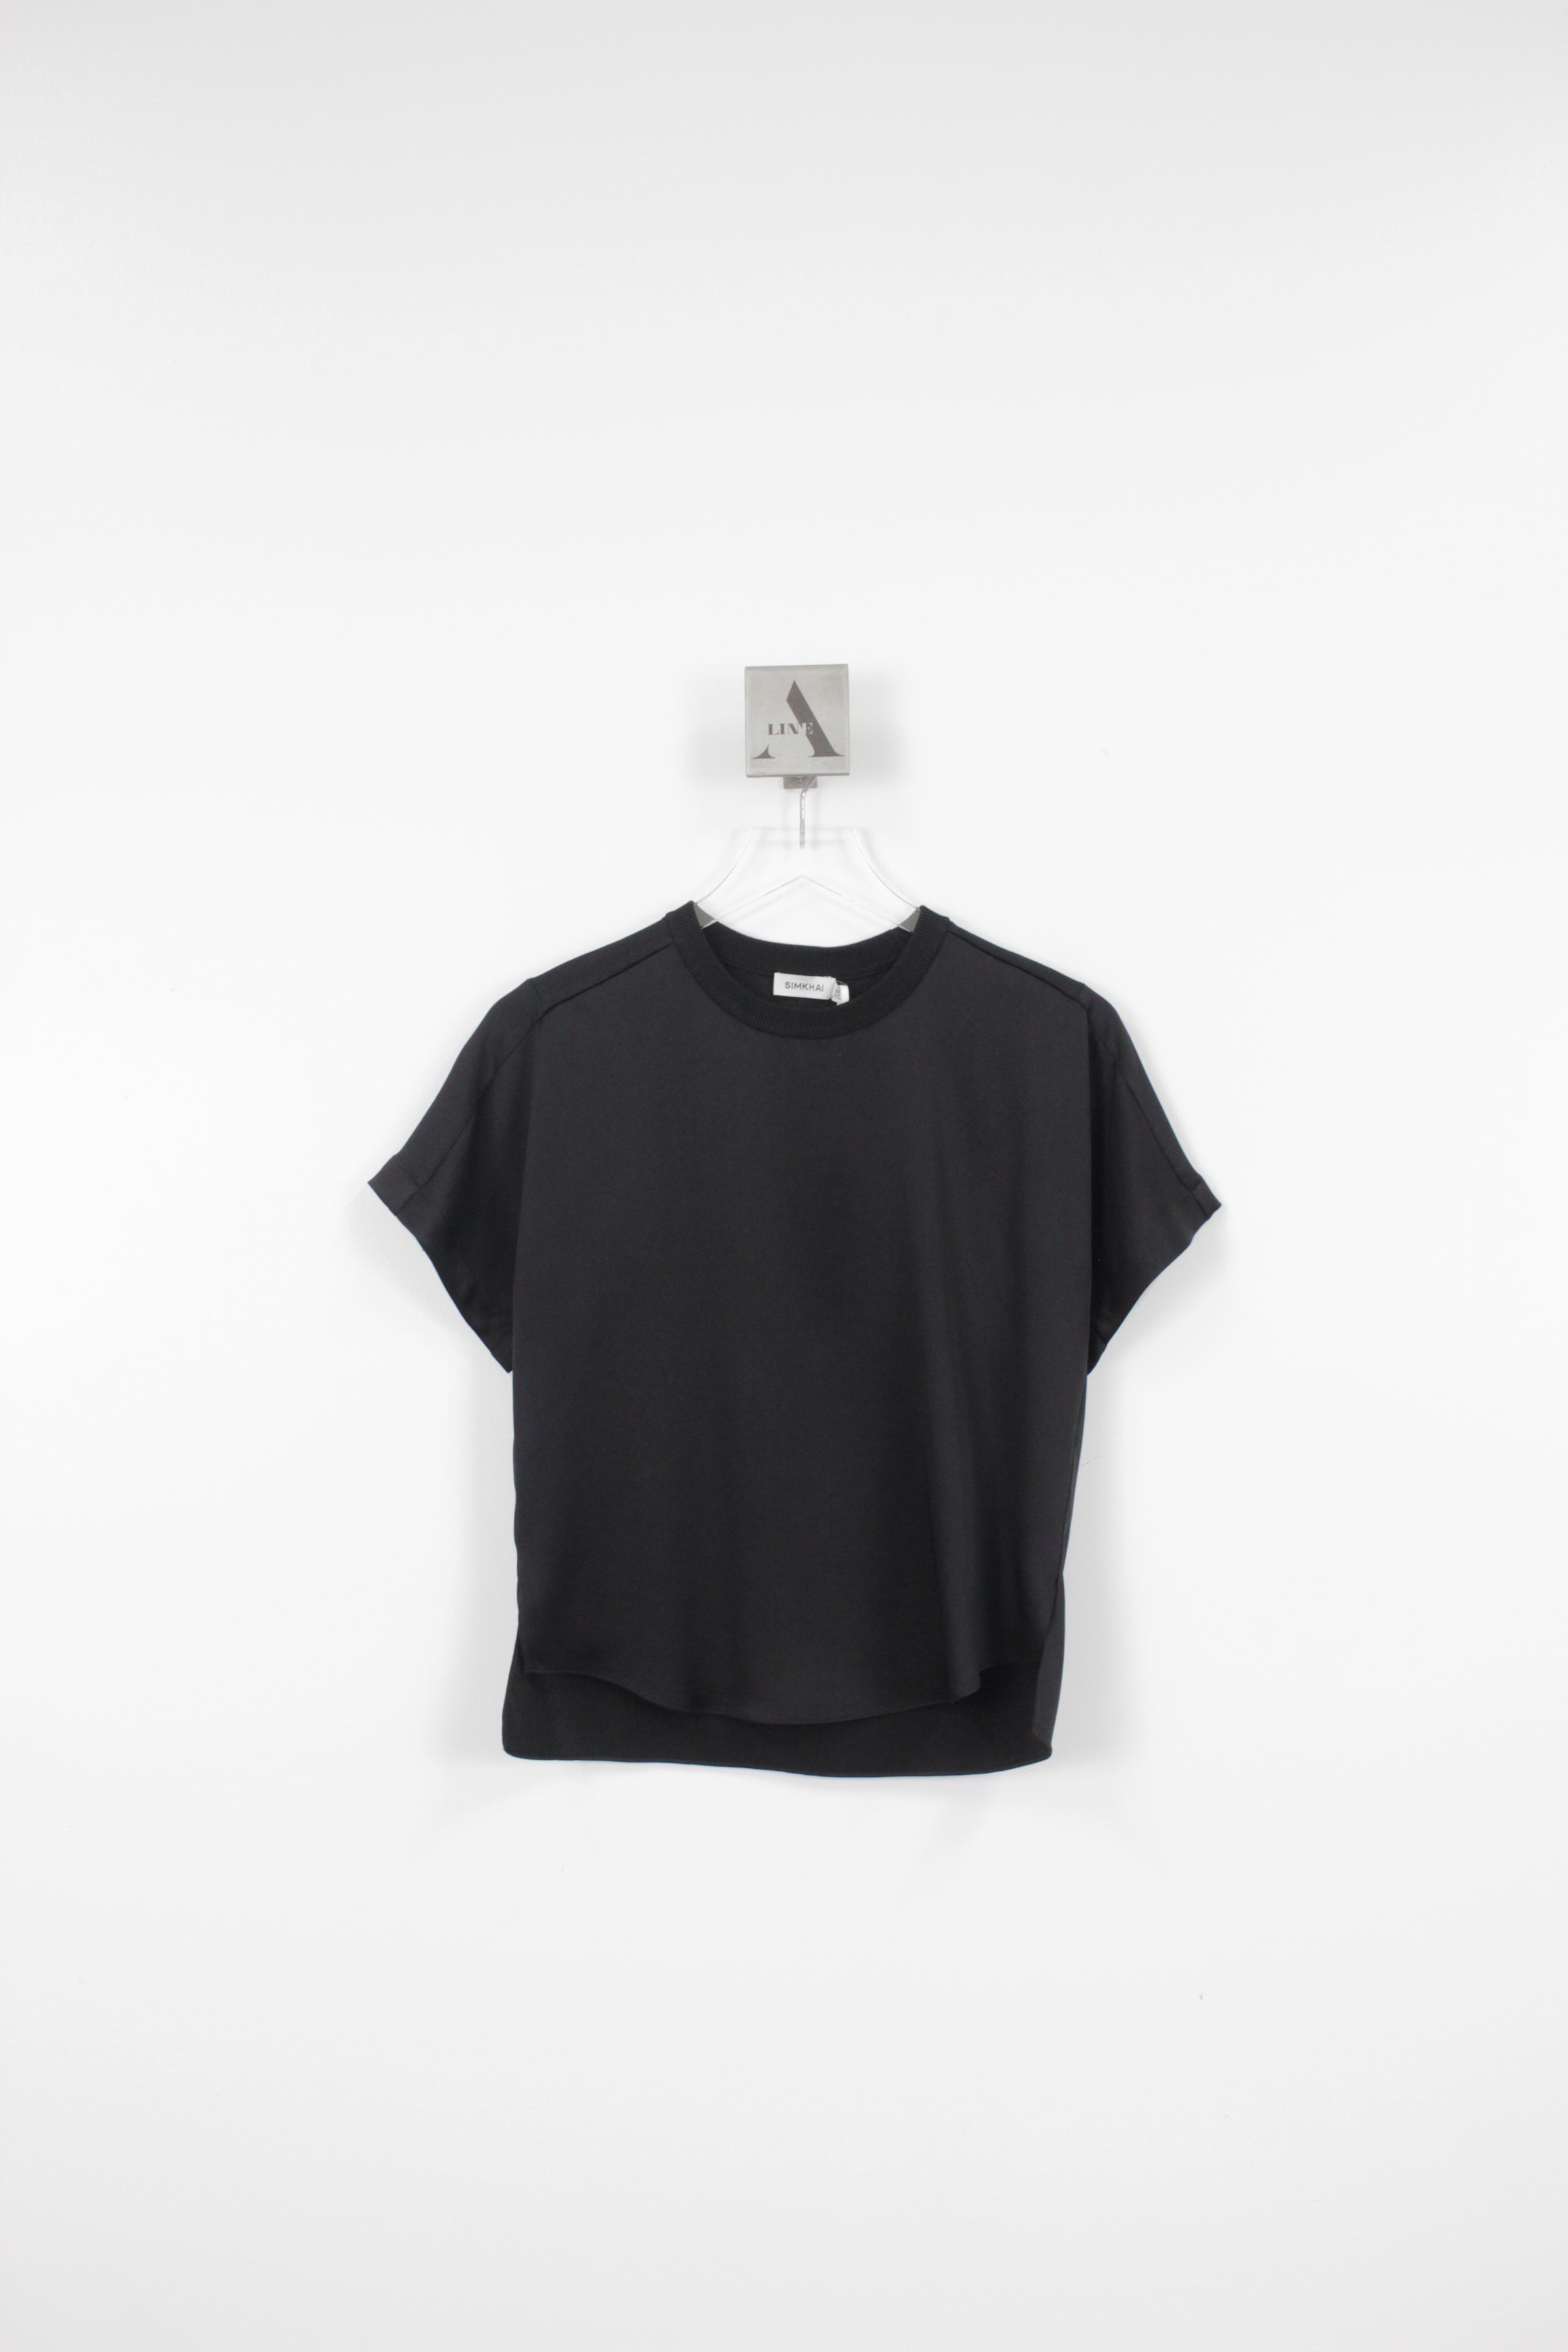 ADDY S/S COMBO T-SHIRT